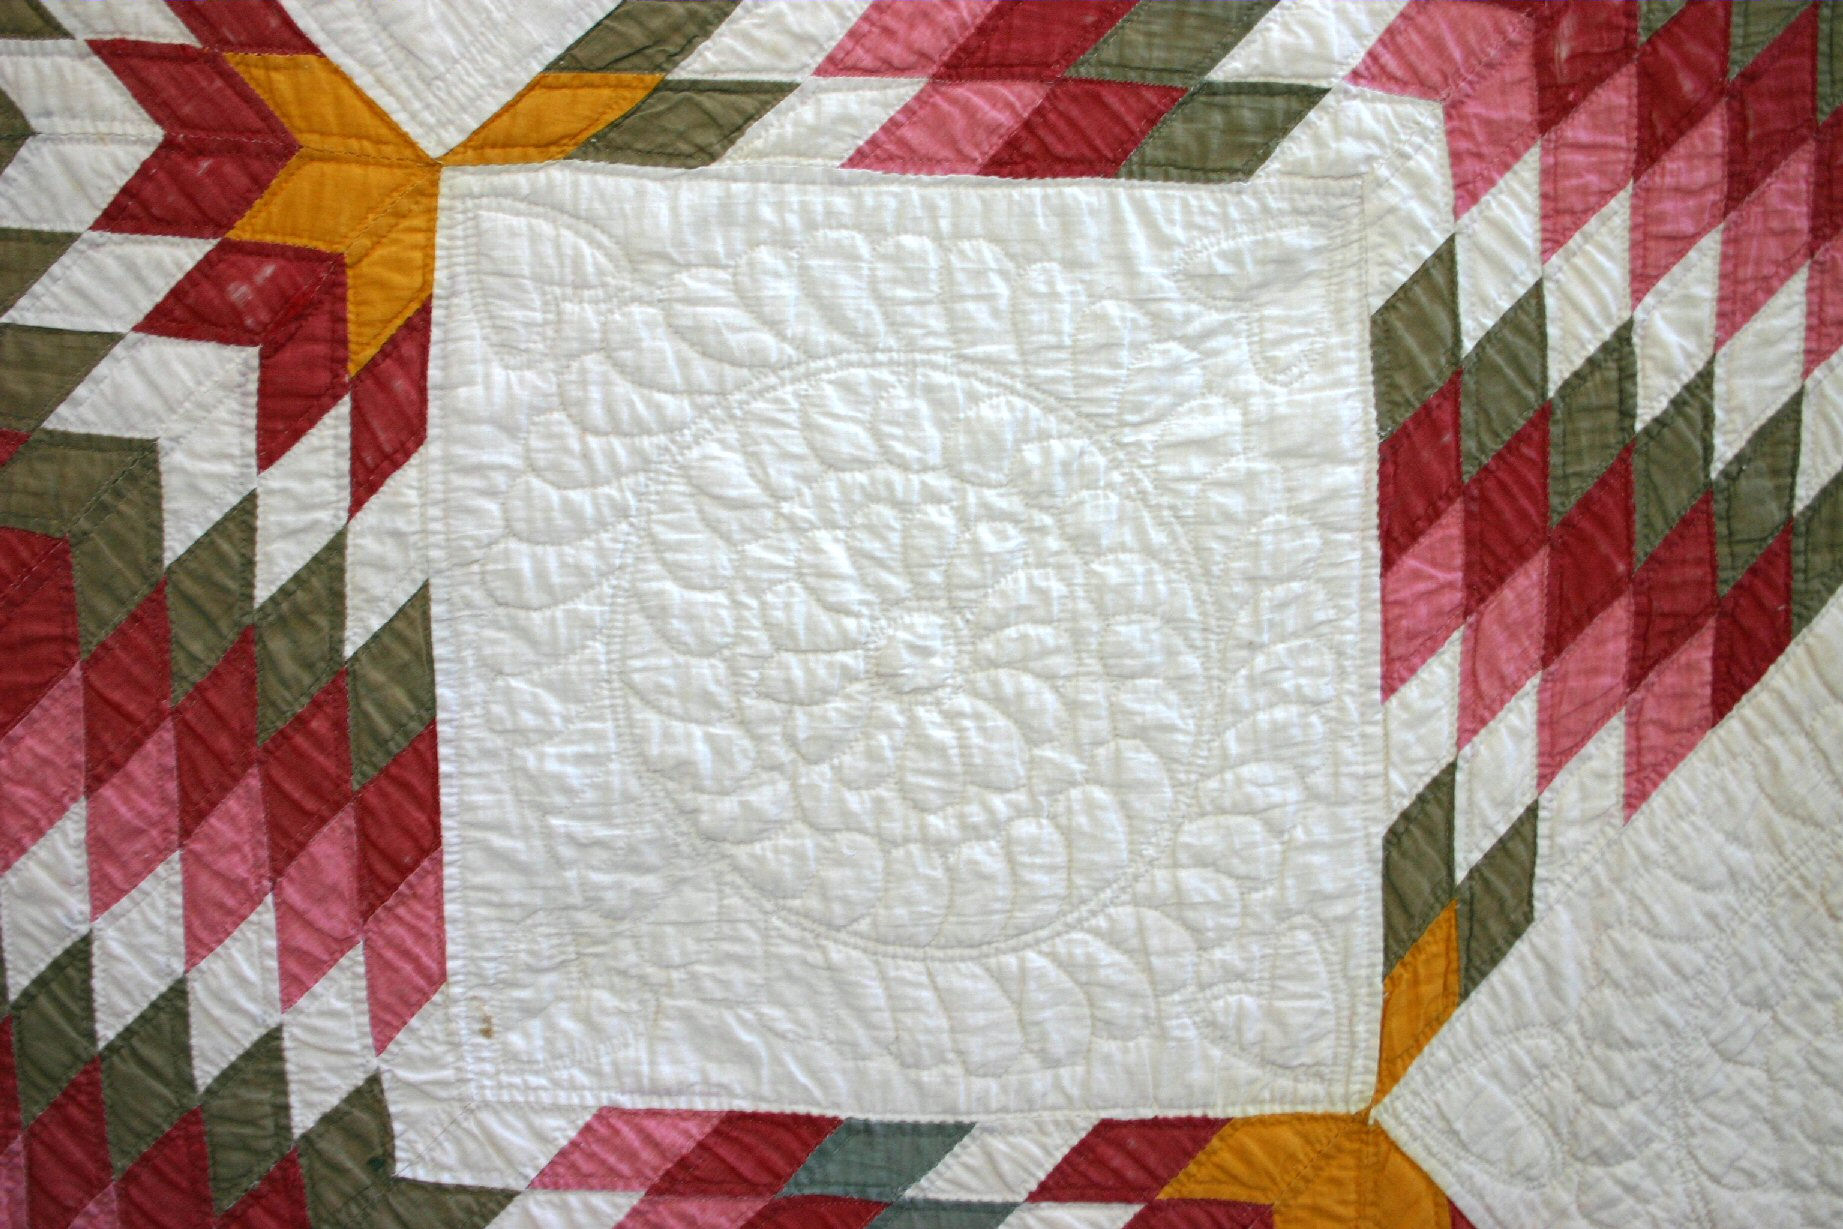 How To Make A Patch Quilt By Hand